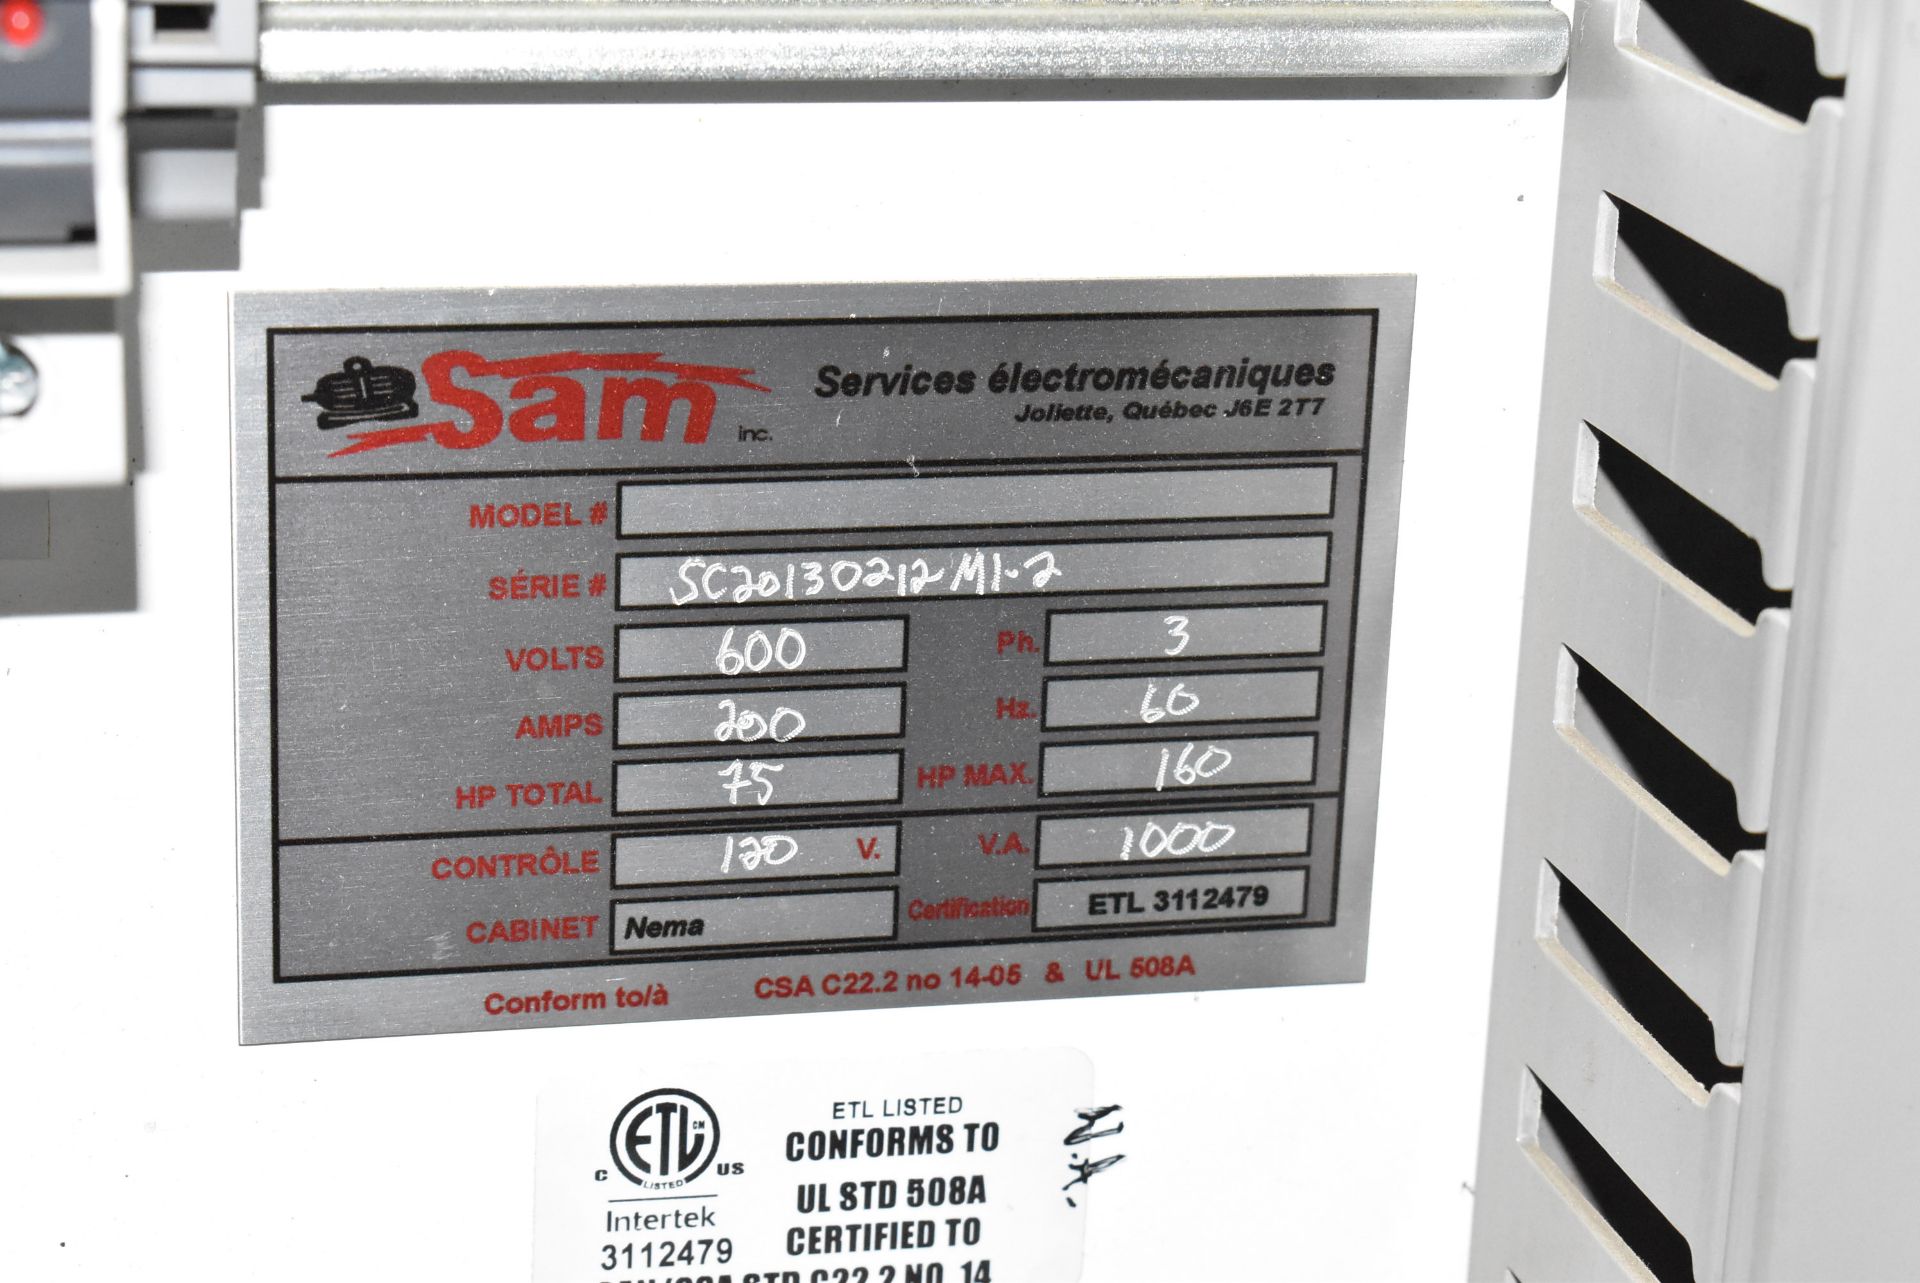 SAM MULTI-SYSTEM CONTROL CABINET WITH (6) LENZE VARIABLE FREQUENCY DRIVES WITH DIGITAL CONTROLS, S/ - Image 5 of 6